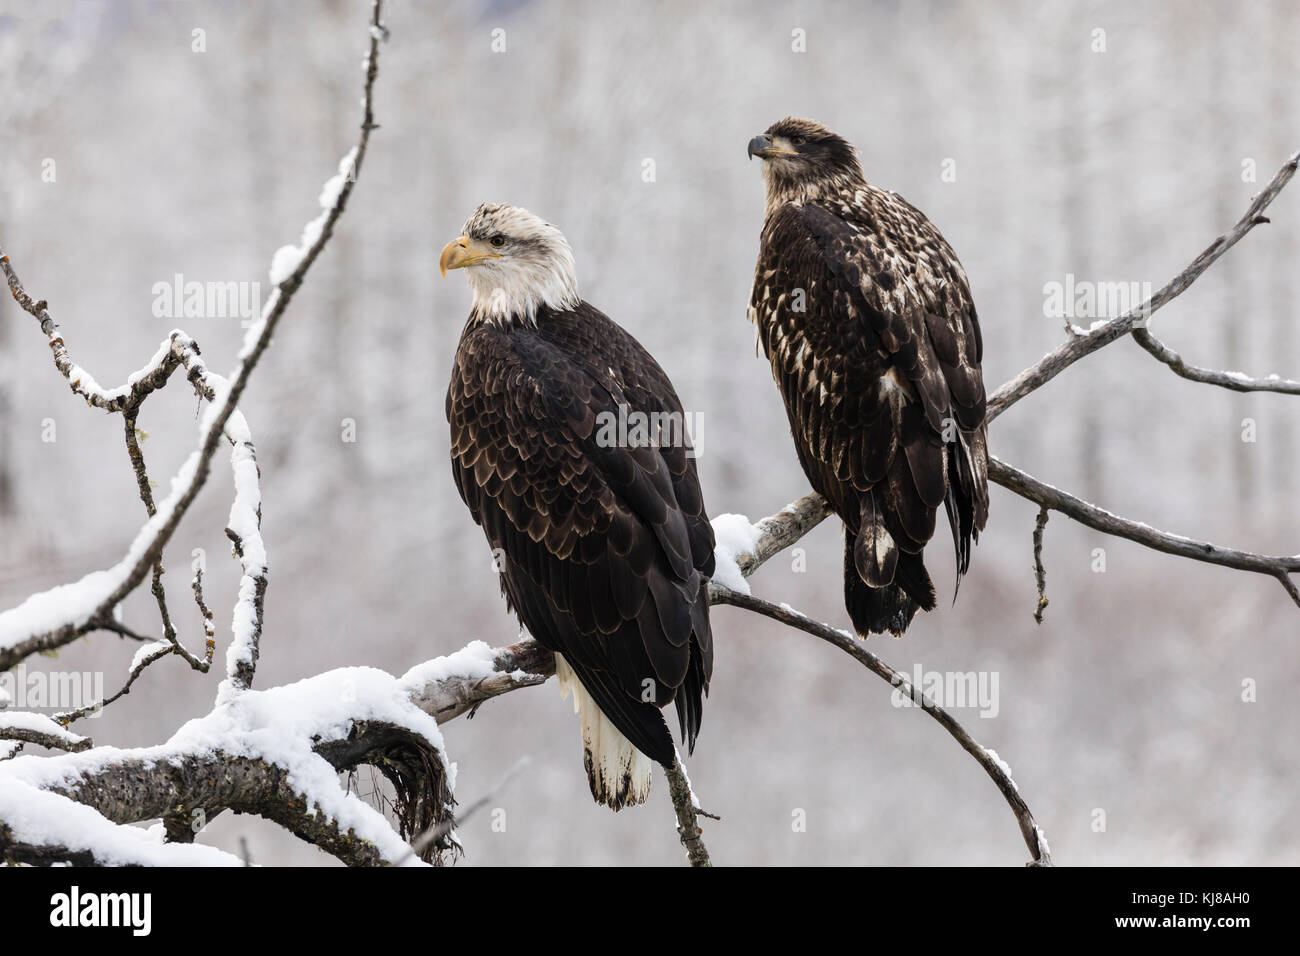 Juvenile Bald Eagles perched on cottonwood branch along the Chilkat River in the Chilkat Bald Eagle Preserve in Southeast Alaska. Stock Photo